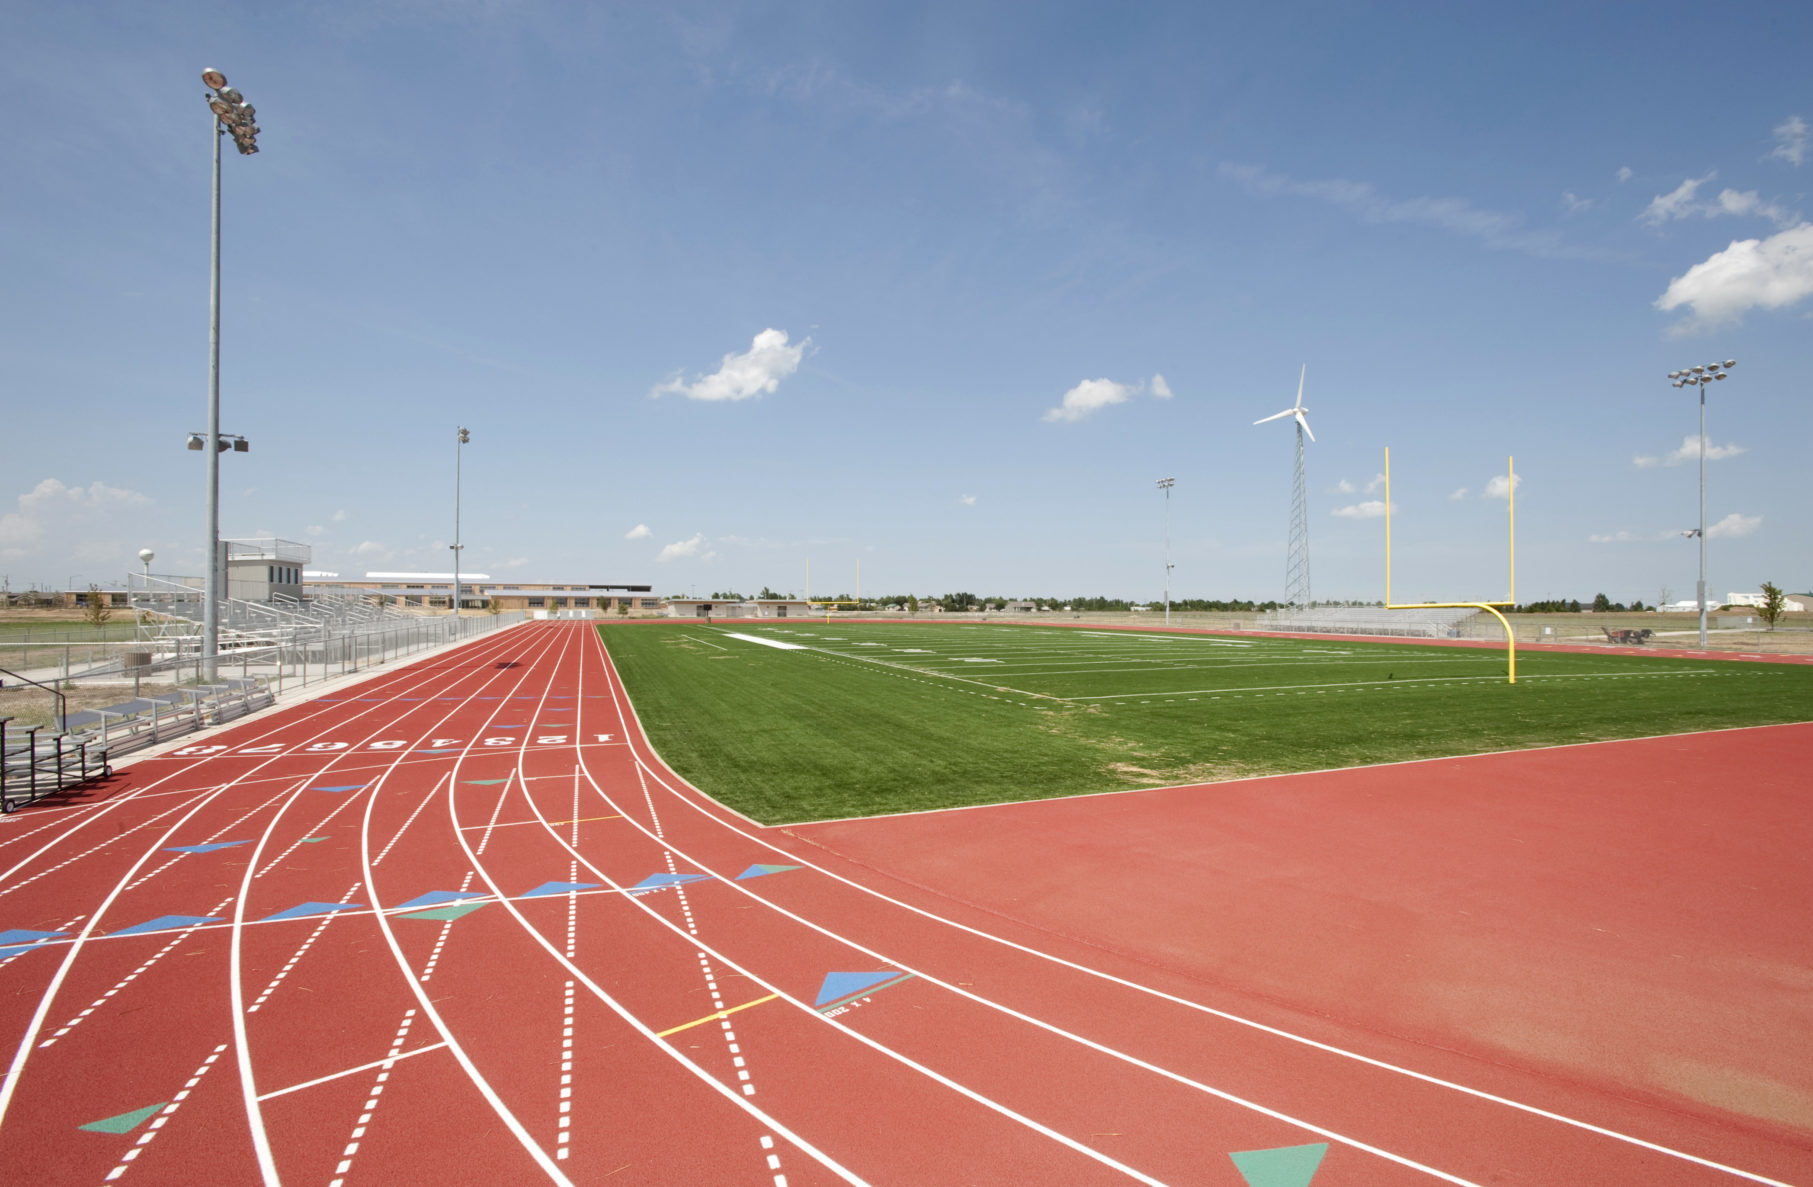 A photo of the track at the Kiowa County Schools, built by McCownGordon